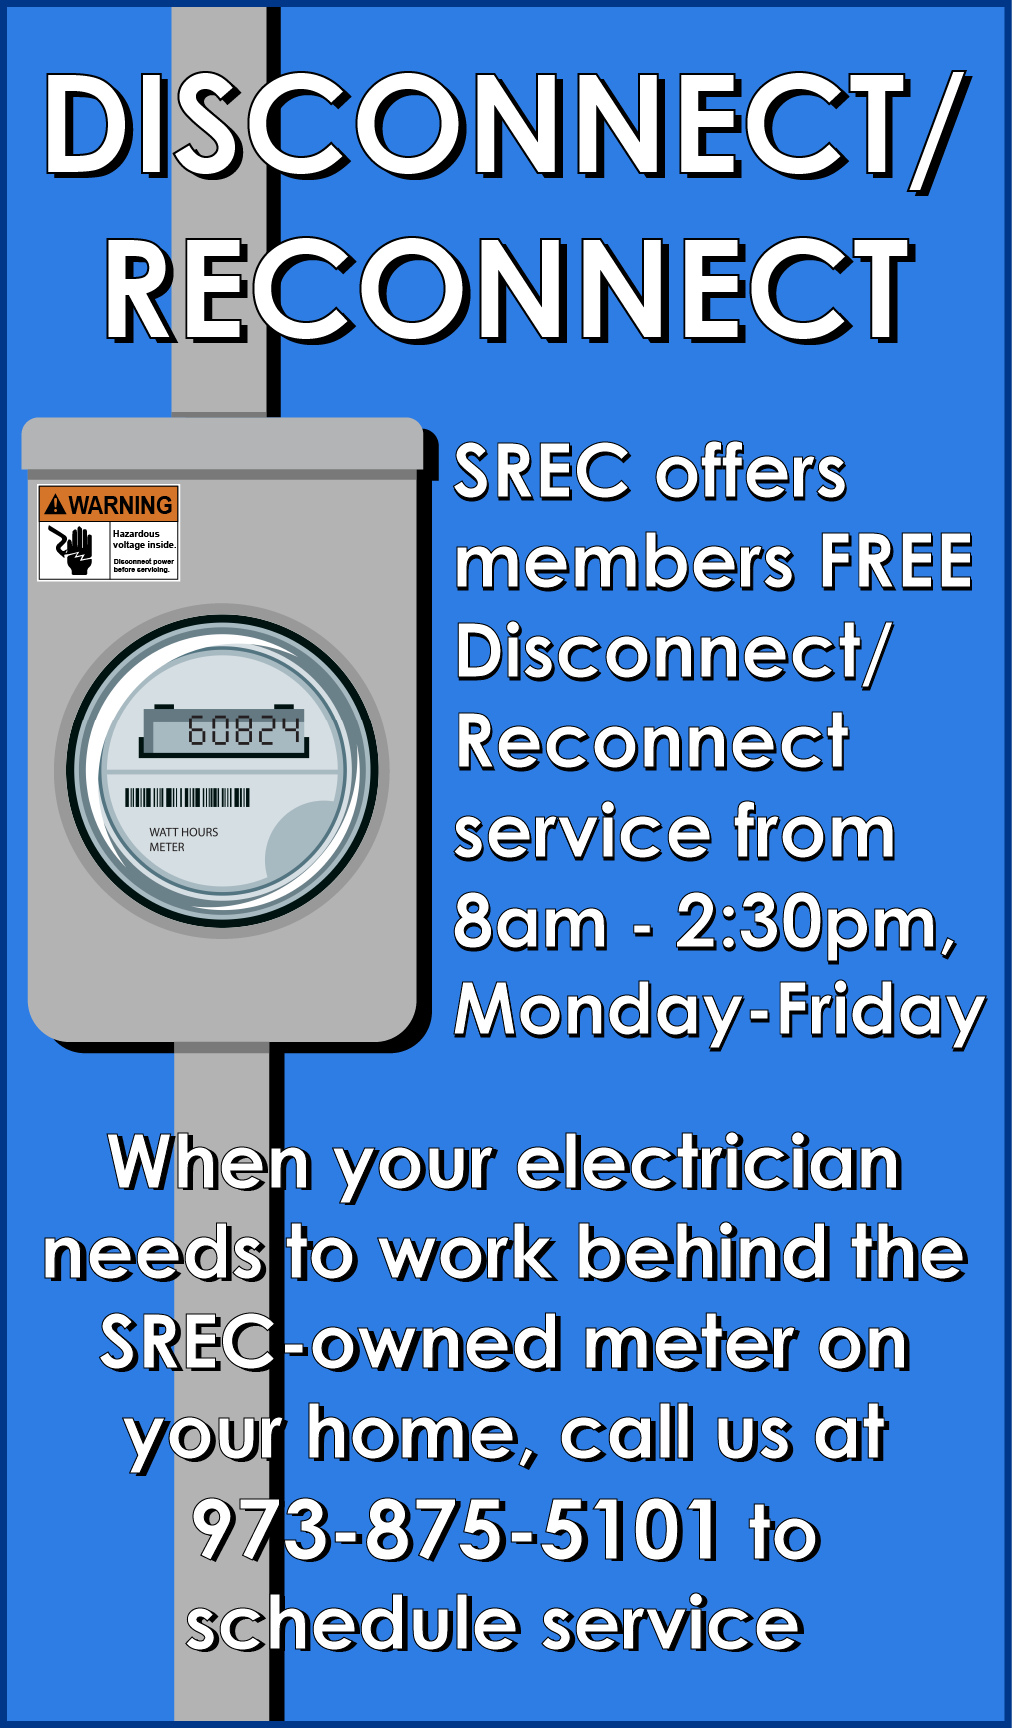 Disconnect/Reconnect Service - offered for FREE during from 8 am to 2:30 pm, Mon-Fri